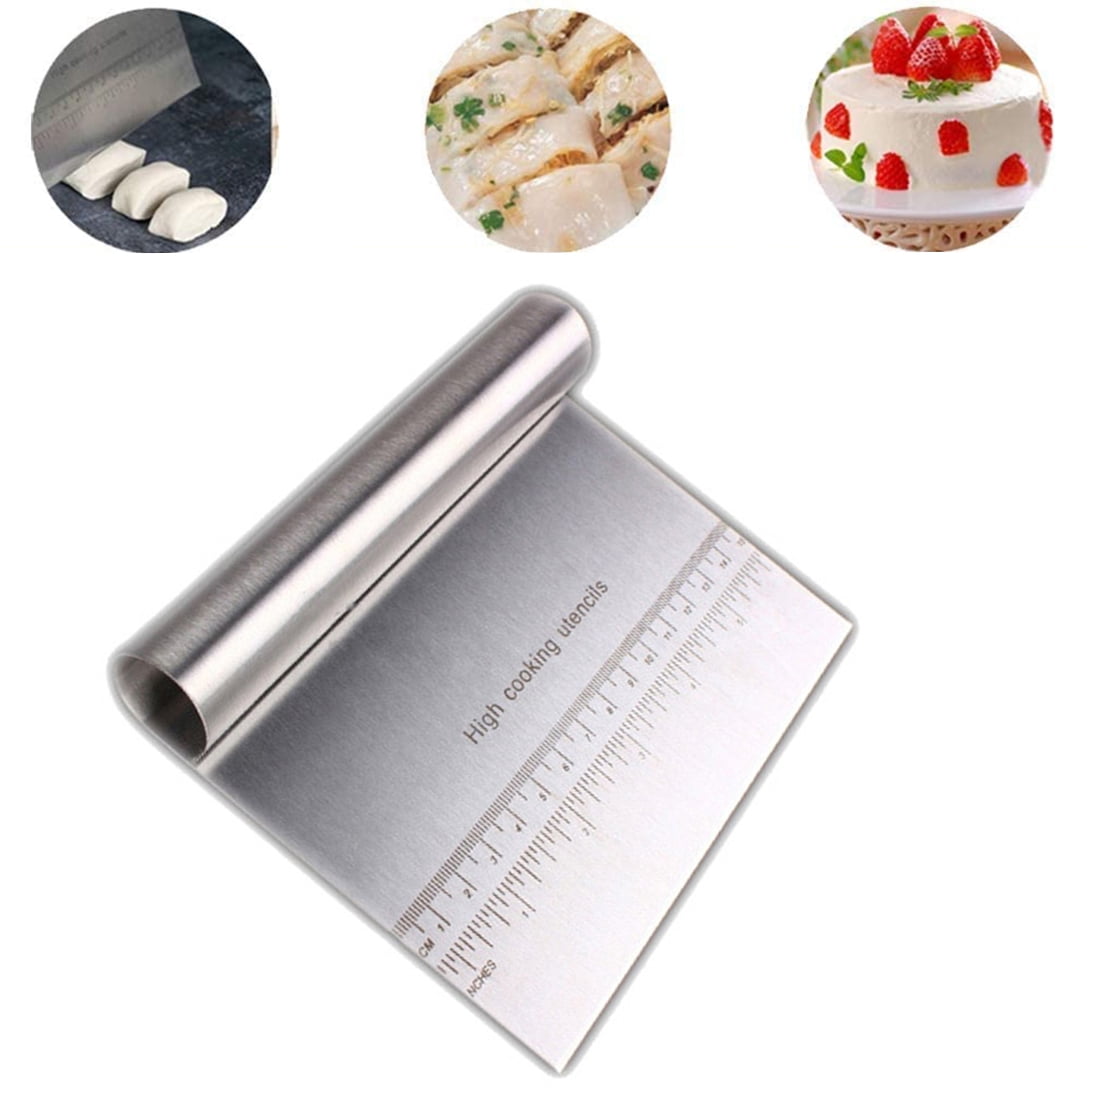 Details about   HomeBaking Dough Scrapper Stainless Steel Dough Cutter Includes Measuring I6E9